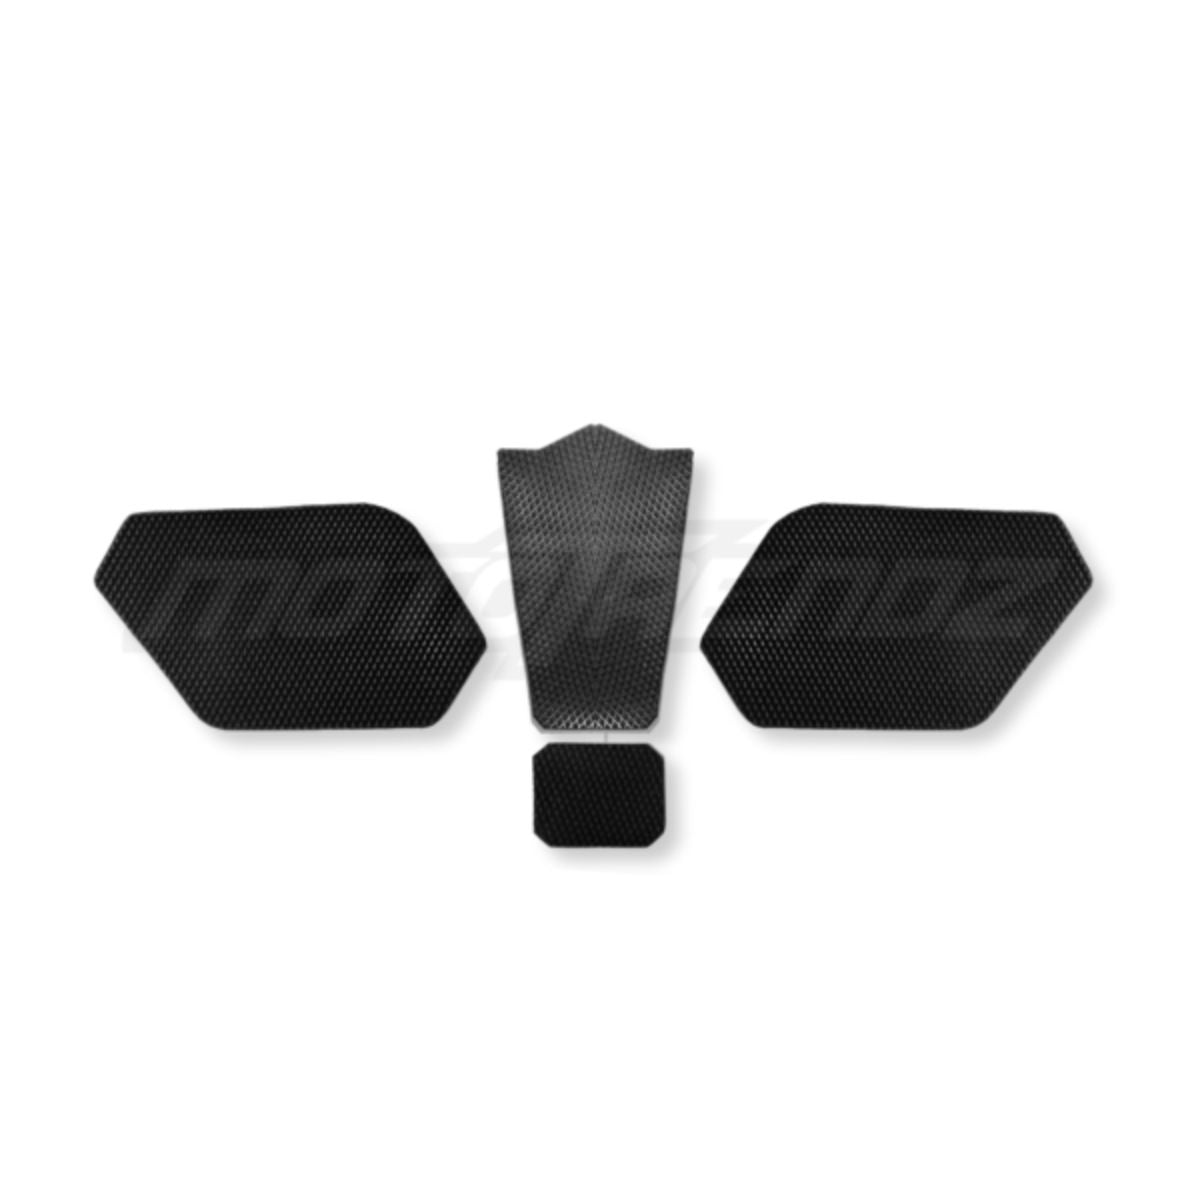 Traction Pads for Yamaha R15 V4/R15 M 2